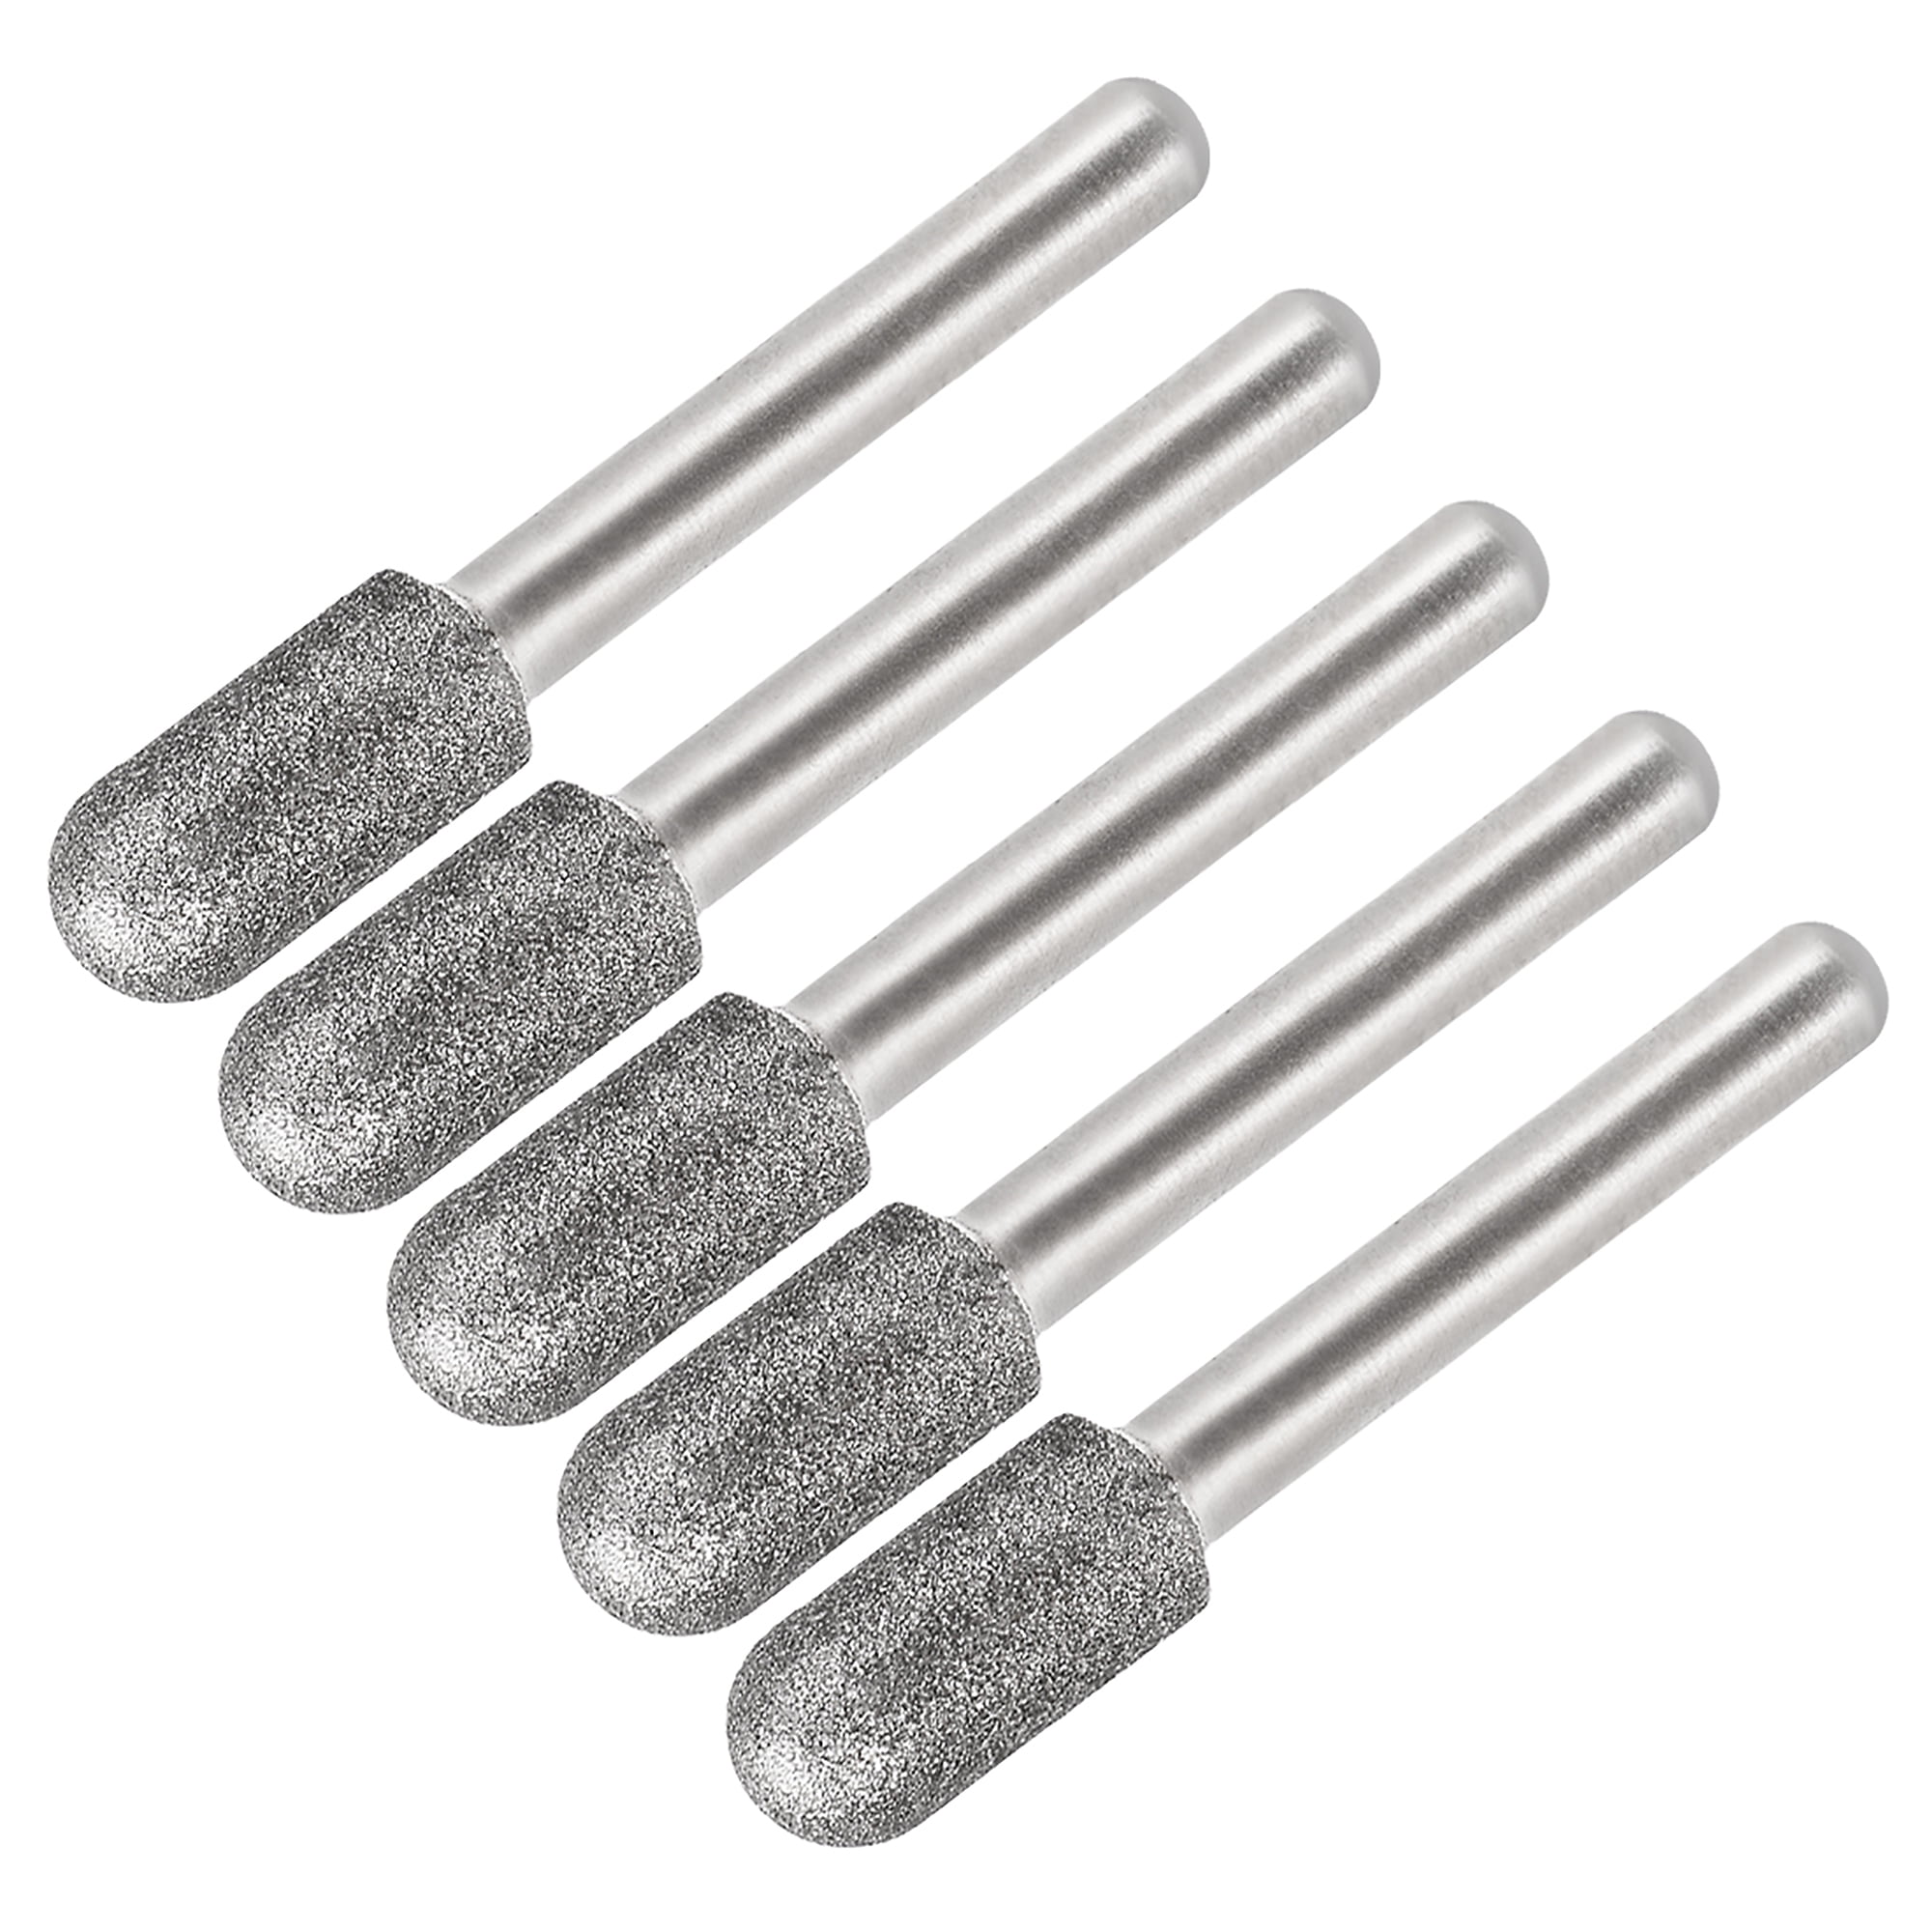 Diamond Burrs Grinding Drill Bits for Rotary Tool 1/4-Inch Shank 10mm ...